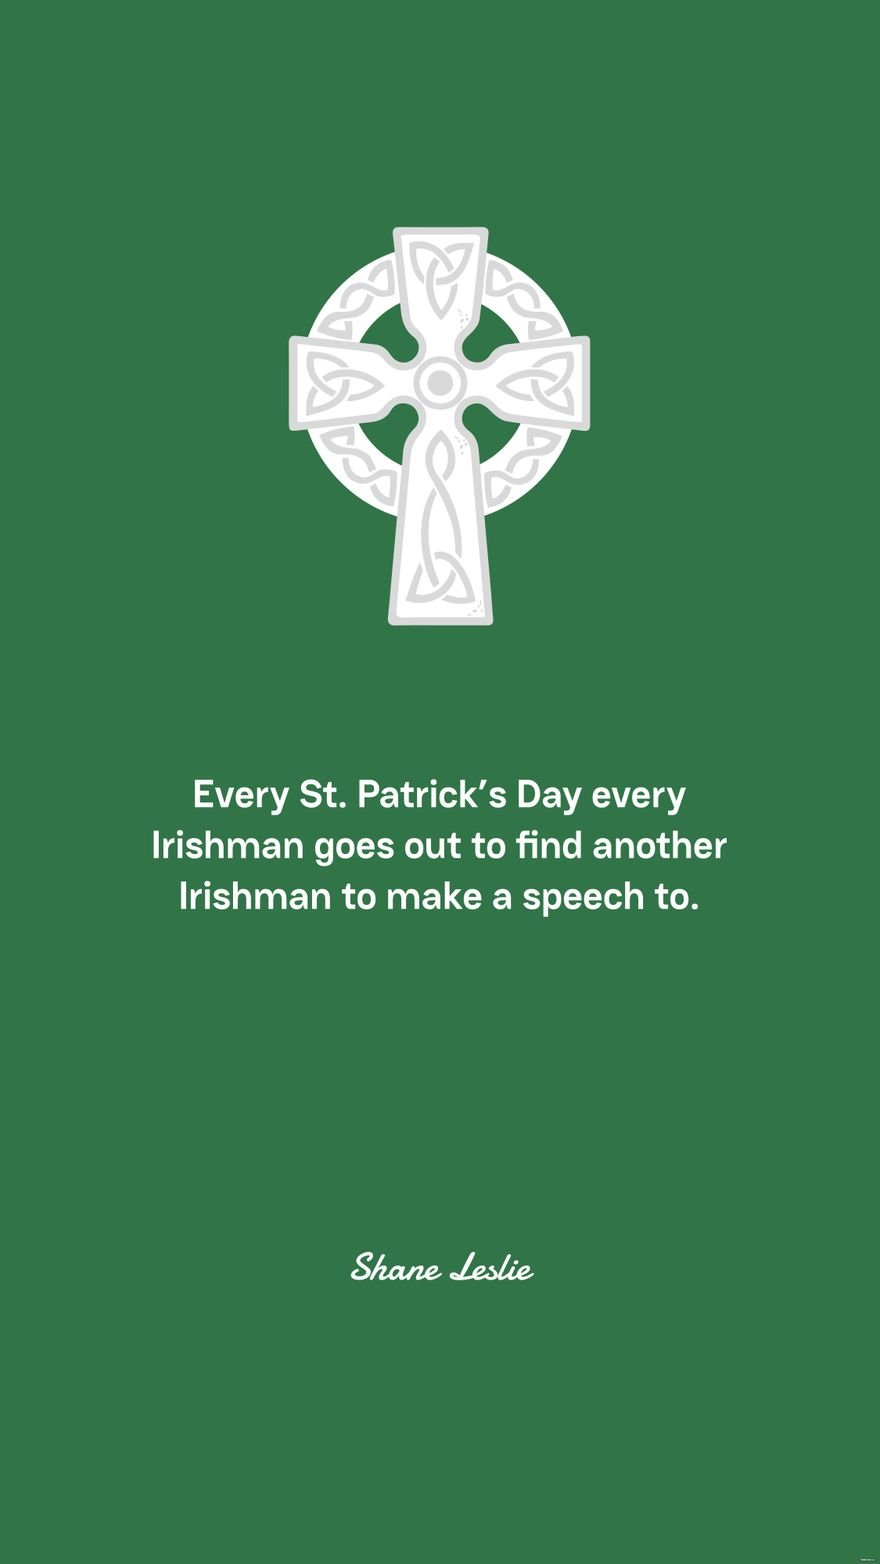 Free Shane Leslie - Every St. Patrick’s Day every Irishman goes out to find another Irishman to make a speech to.